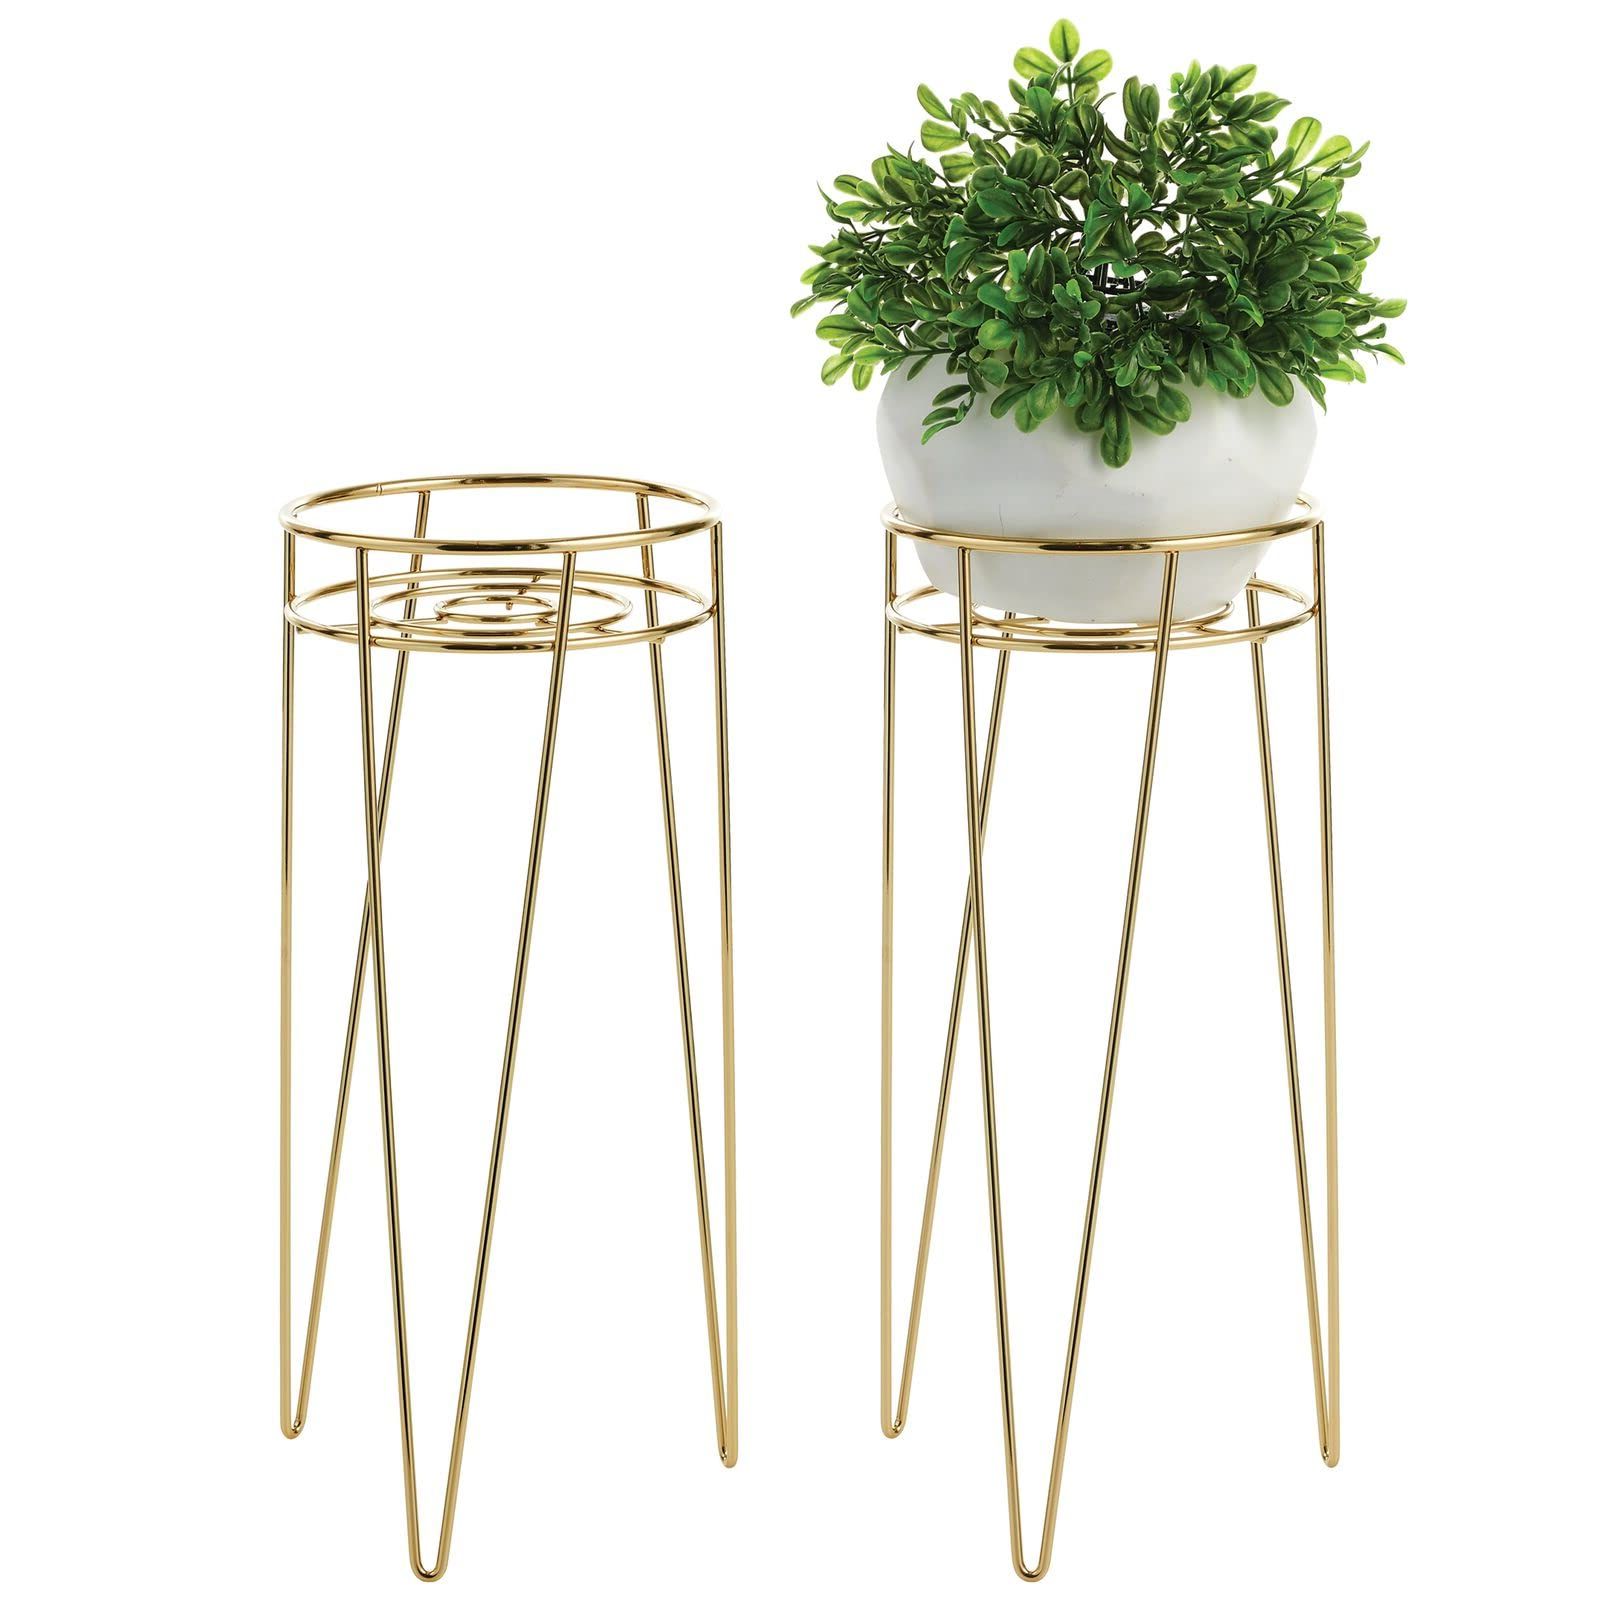 Mdesign Steel Modern 17" Plant Stand Holder With Hairpin Legs – Display  Indoor/outdoor Plants, Flowers, Succulents On Shelf, Balcony, Patio,  Garden, Office, Concerto Collection, 2 Pack, Soft Brass Throughout Current Brass Plant Stands (View 11 of 15)